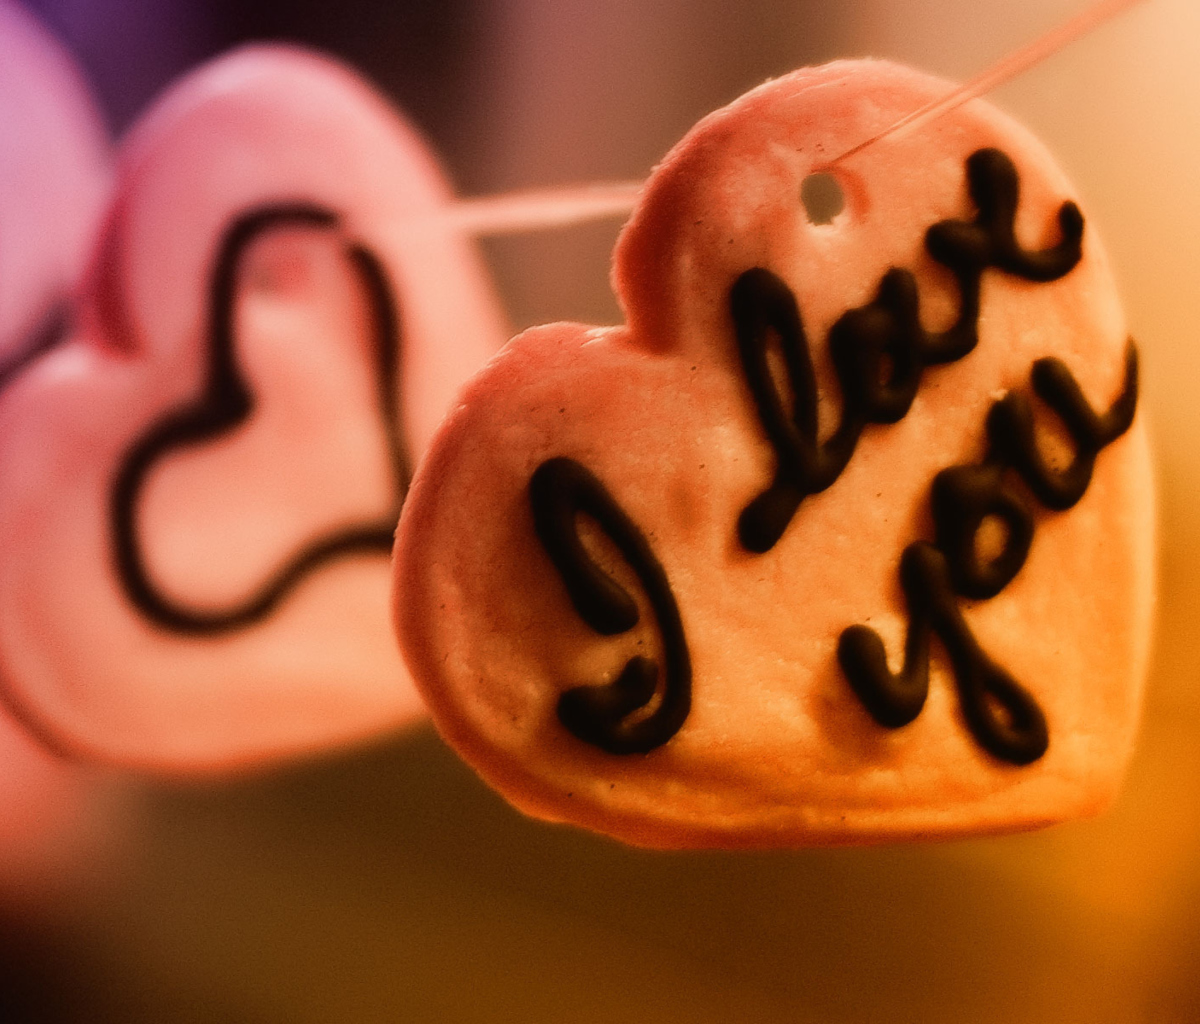 I Love You Cookie wallpaper 1200x1024